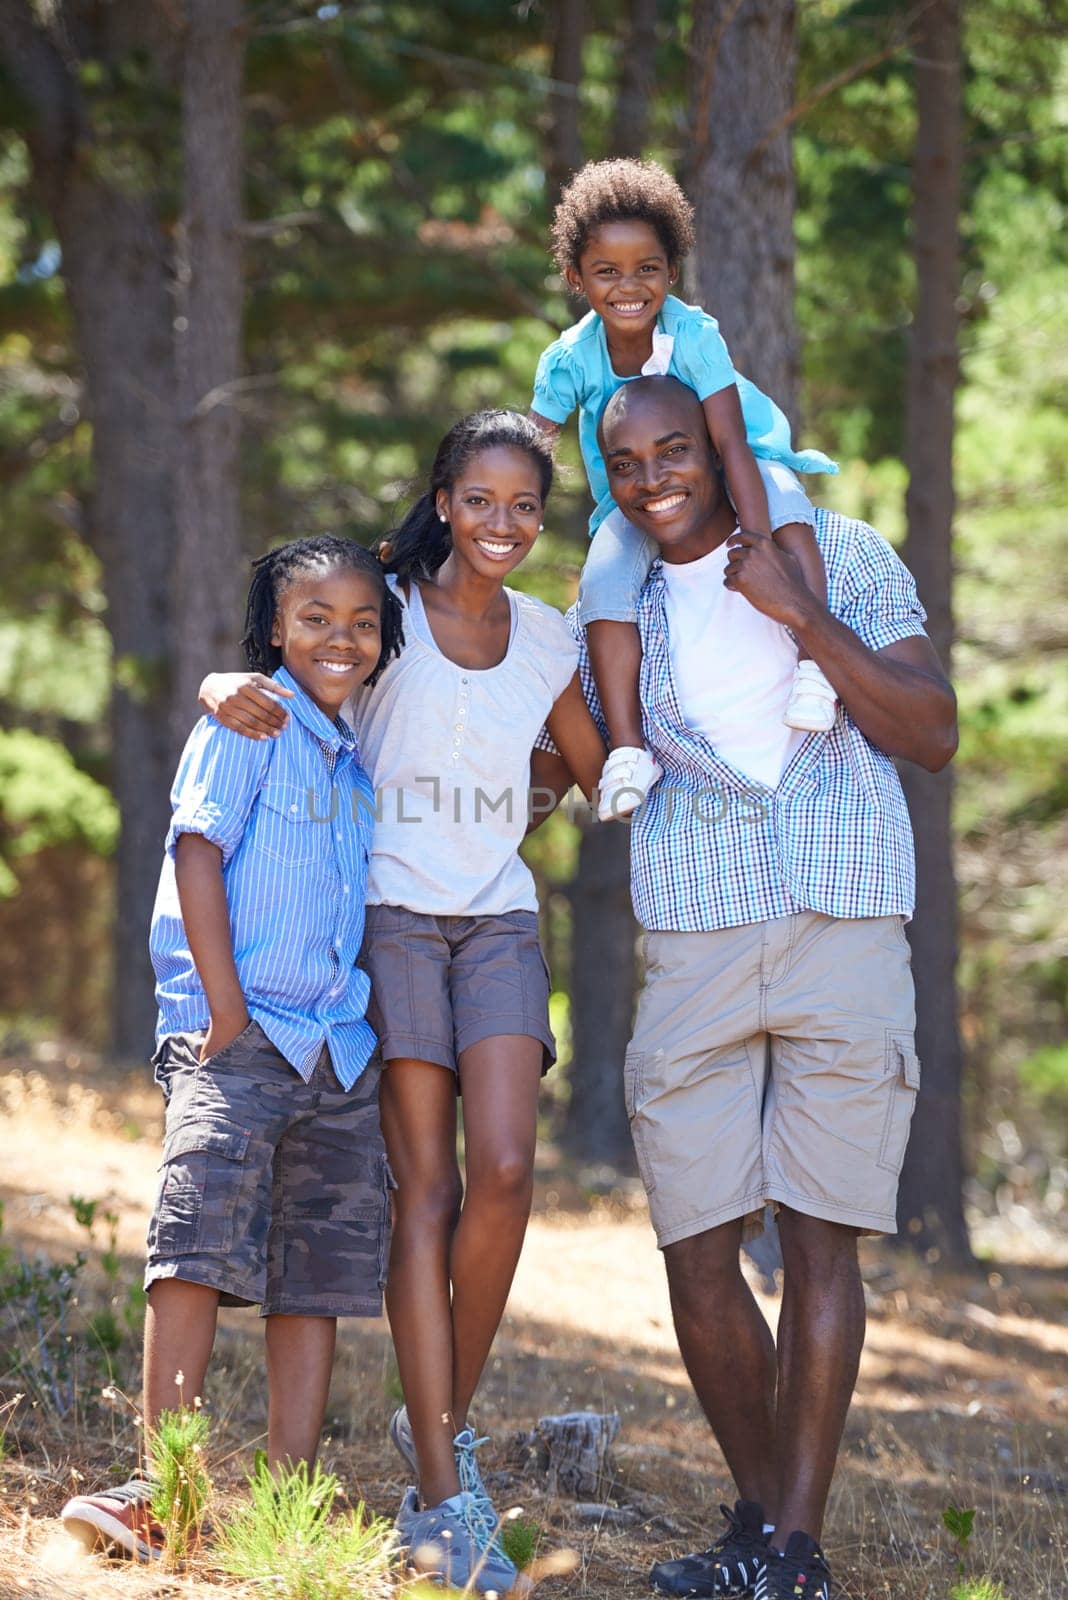 Happy, portrait and black family in forest bonding, fun or walking in nature together. Love, support and children with parents in a park for hiking adventure, journey or travel, explore or vacation.